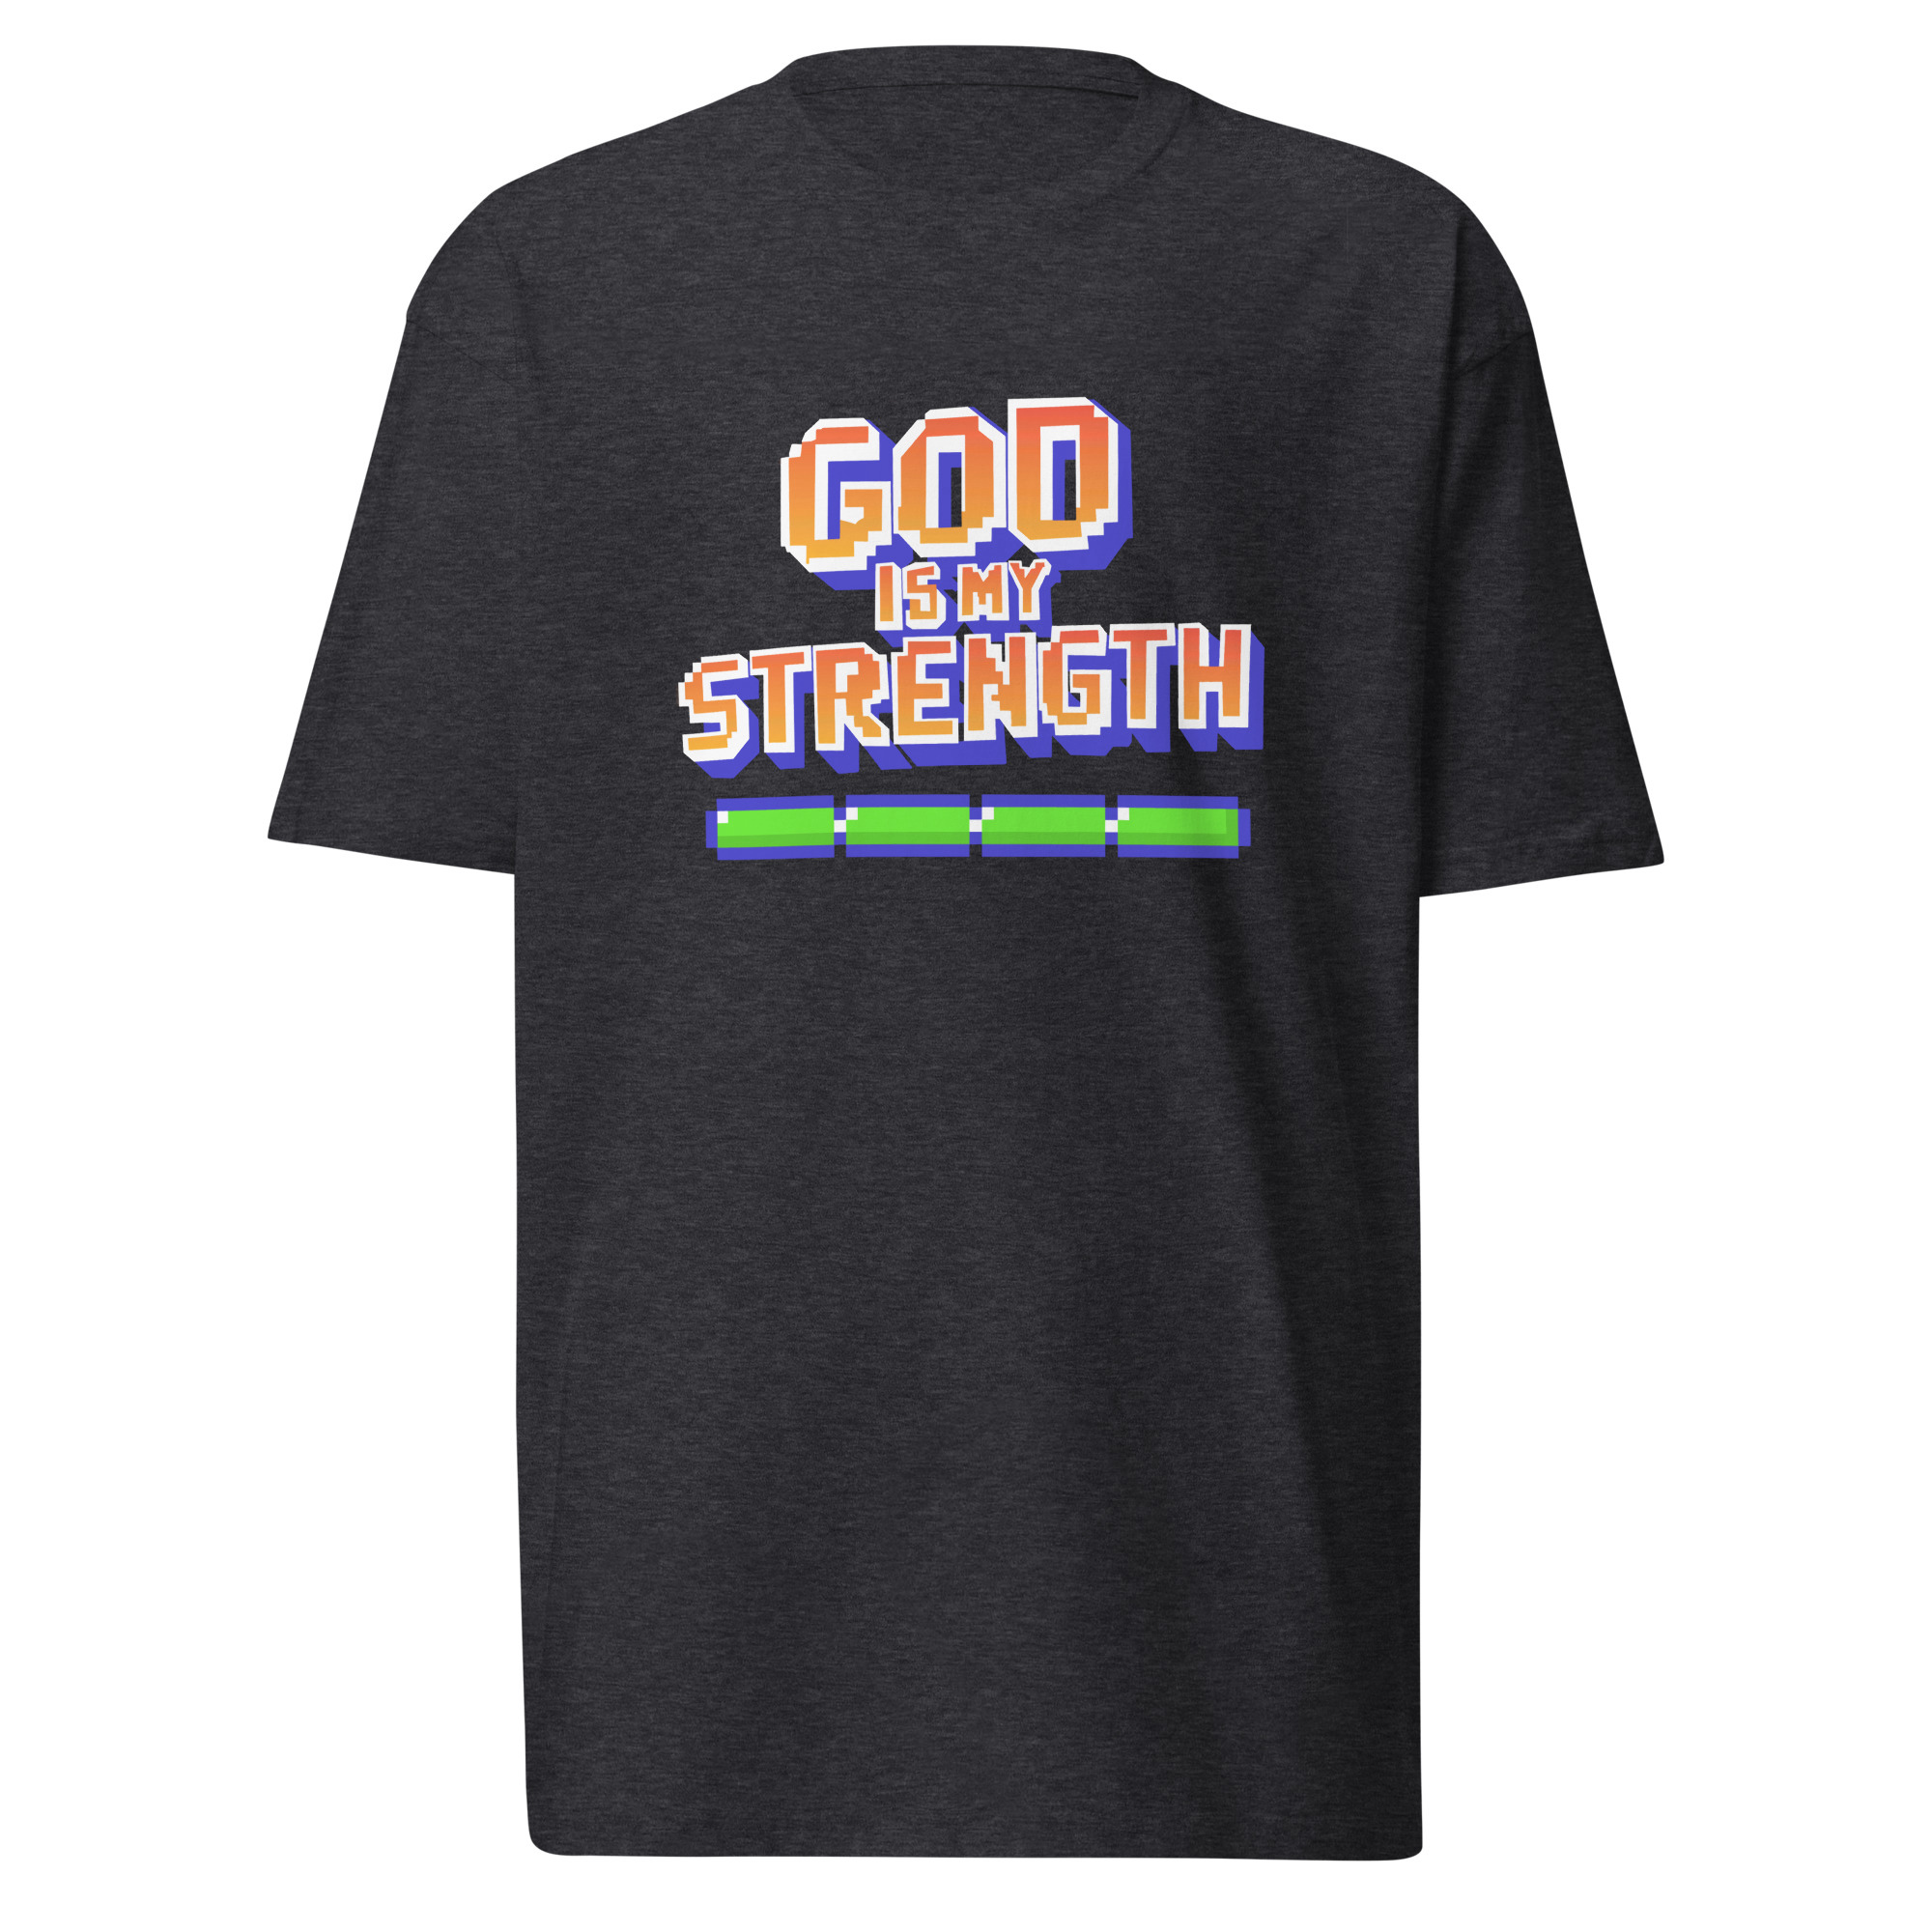 God is my Strength T-Shirt - Charcoal Heather / L